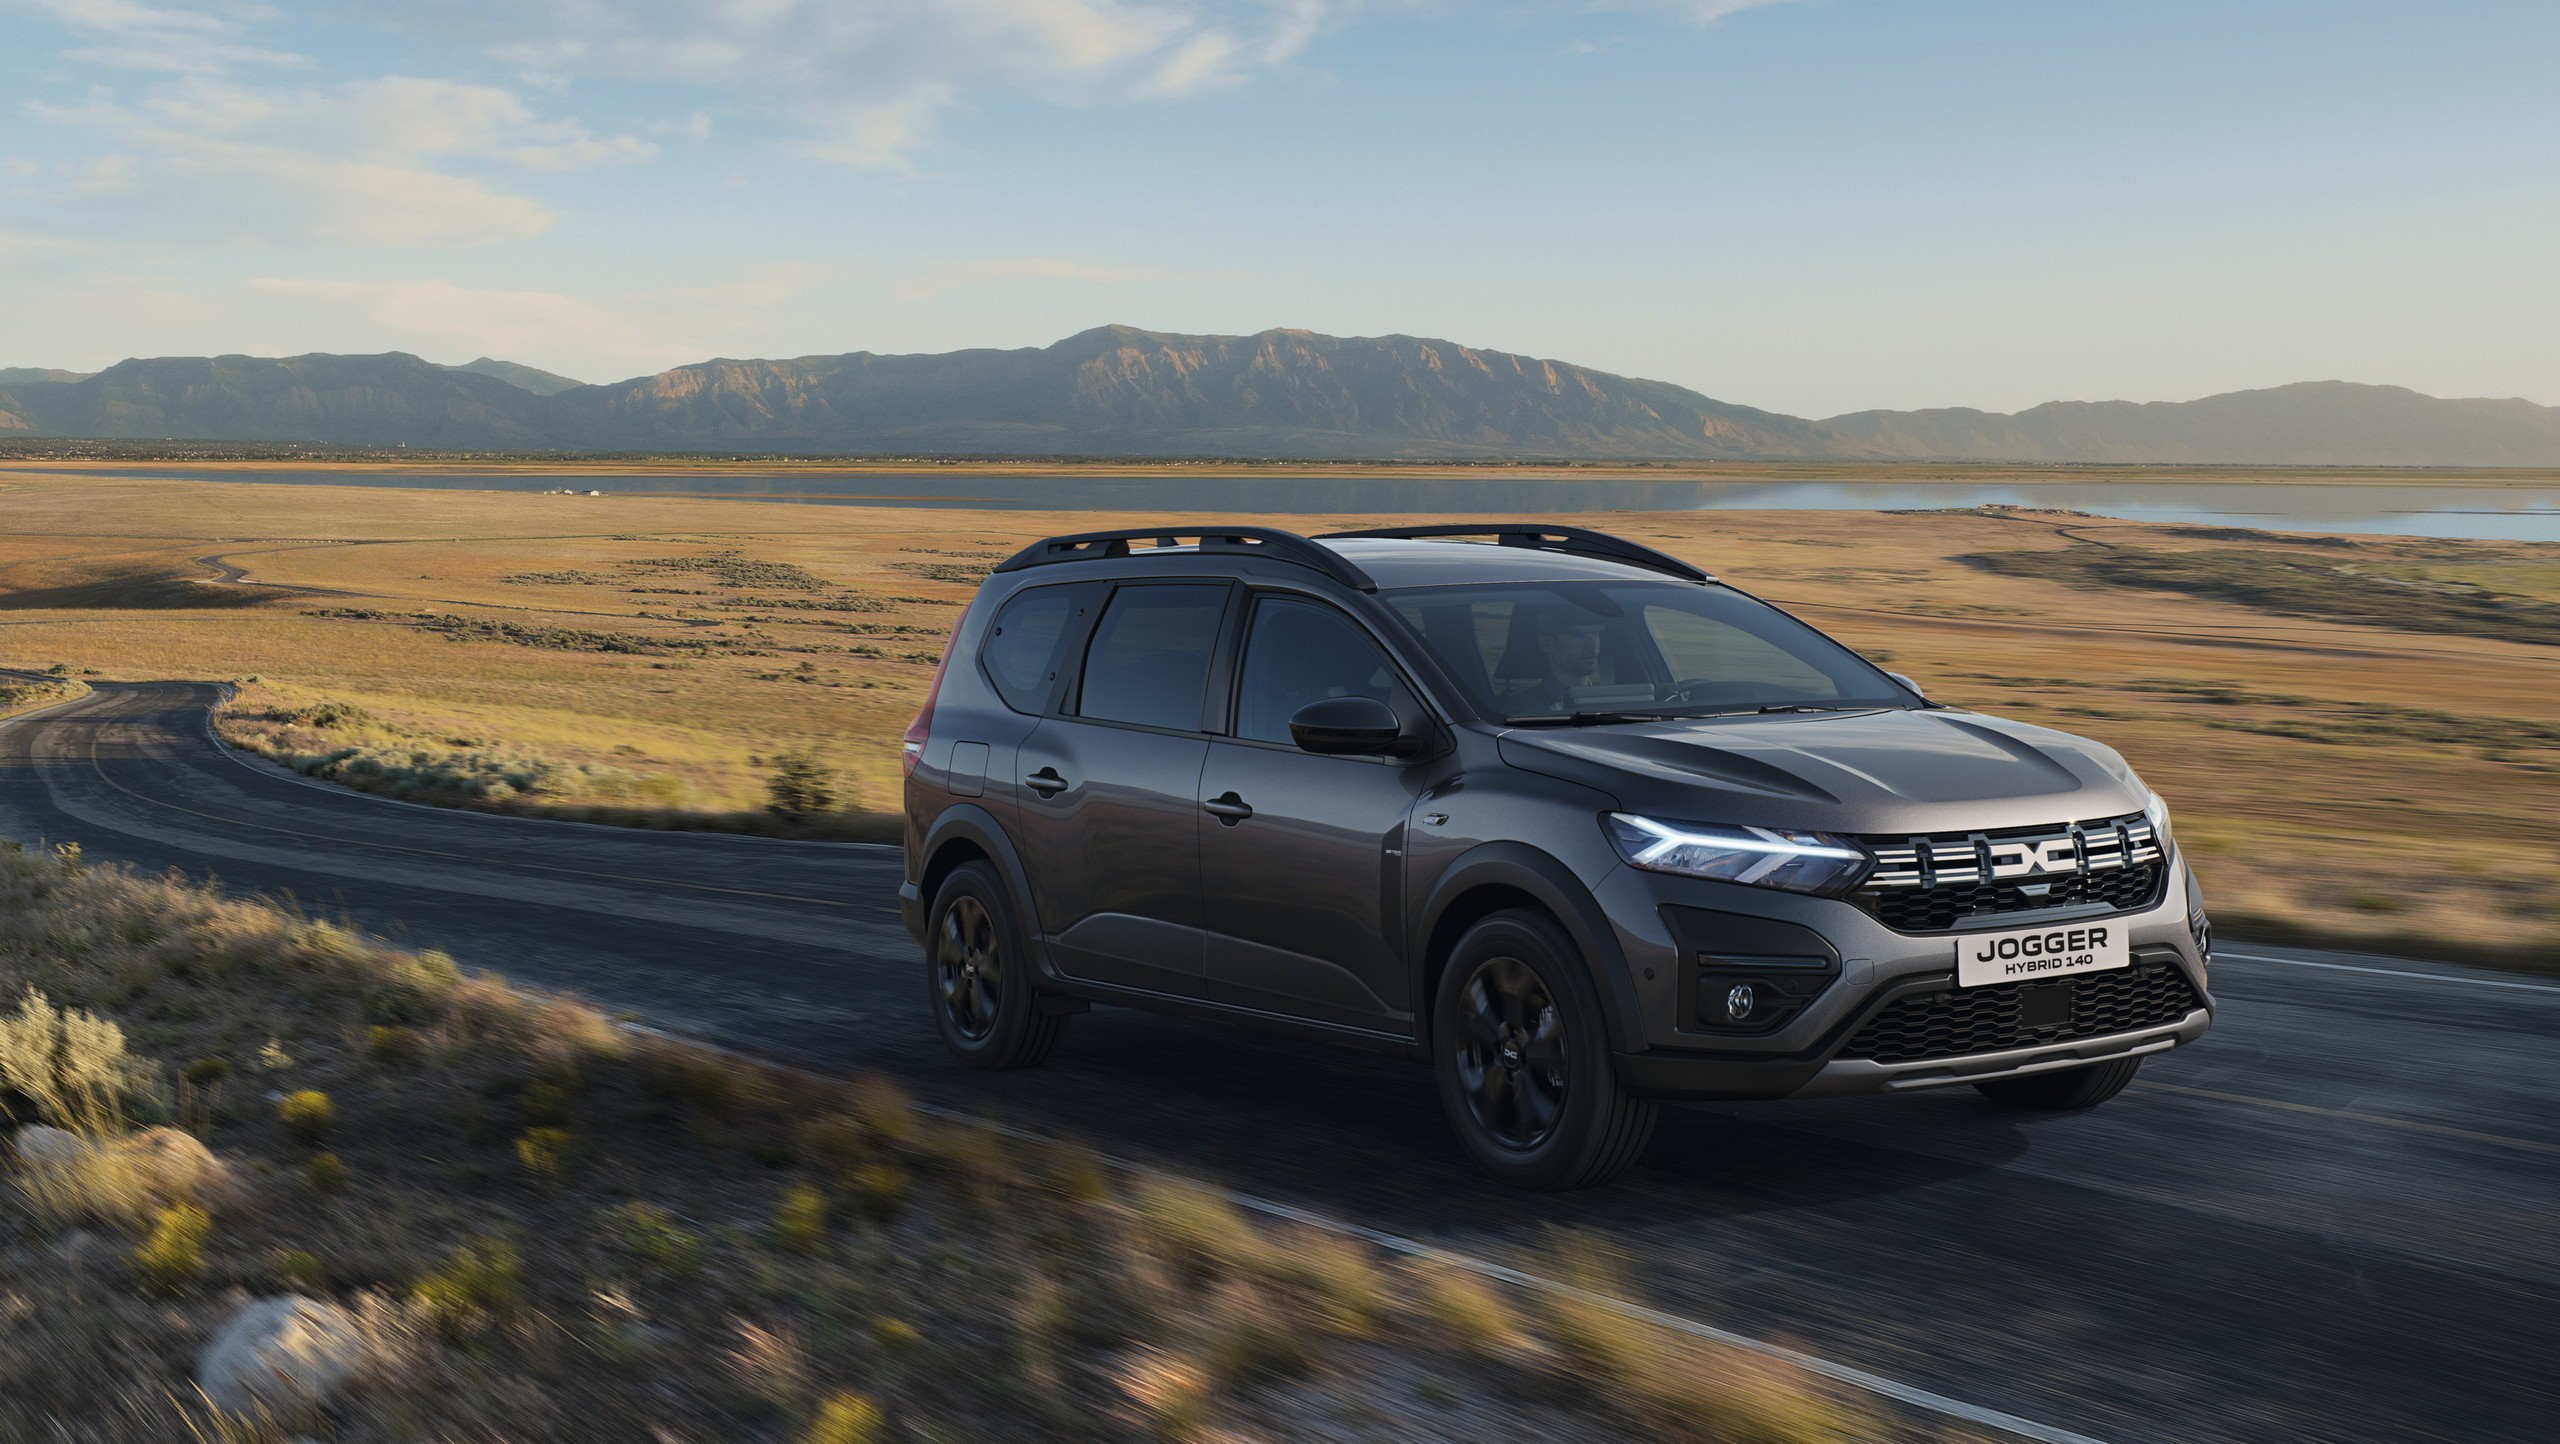 Dacia's Jogger Wins “Best Value Car” for Second Year in a Row